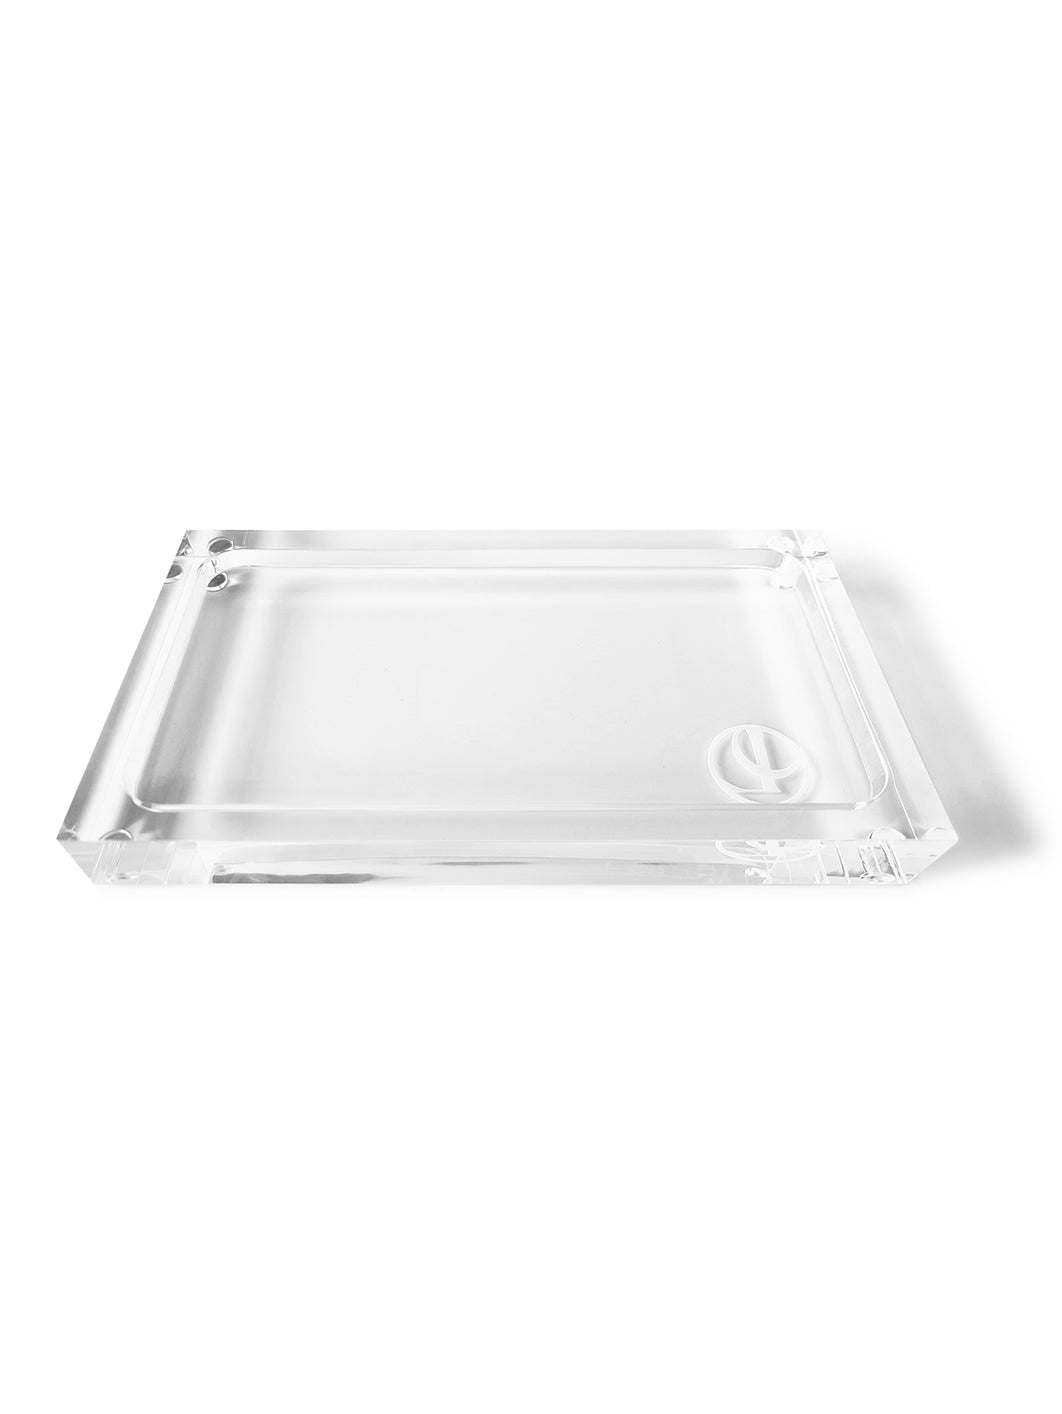 medium lucite acrylic tray made for 2 L'AVANT products